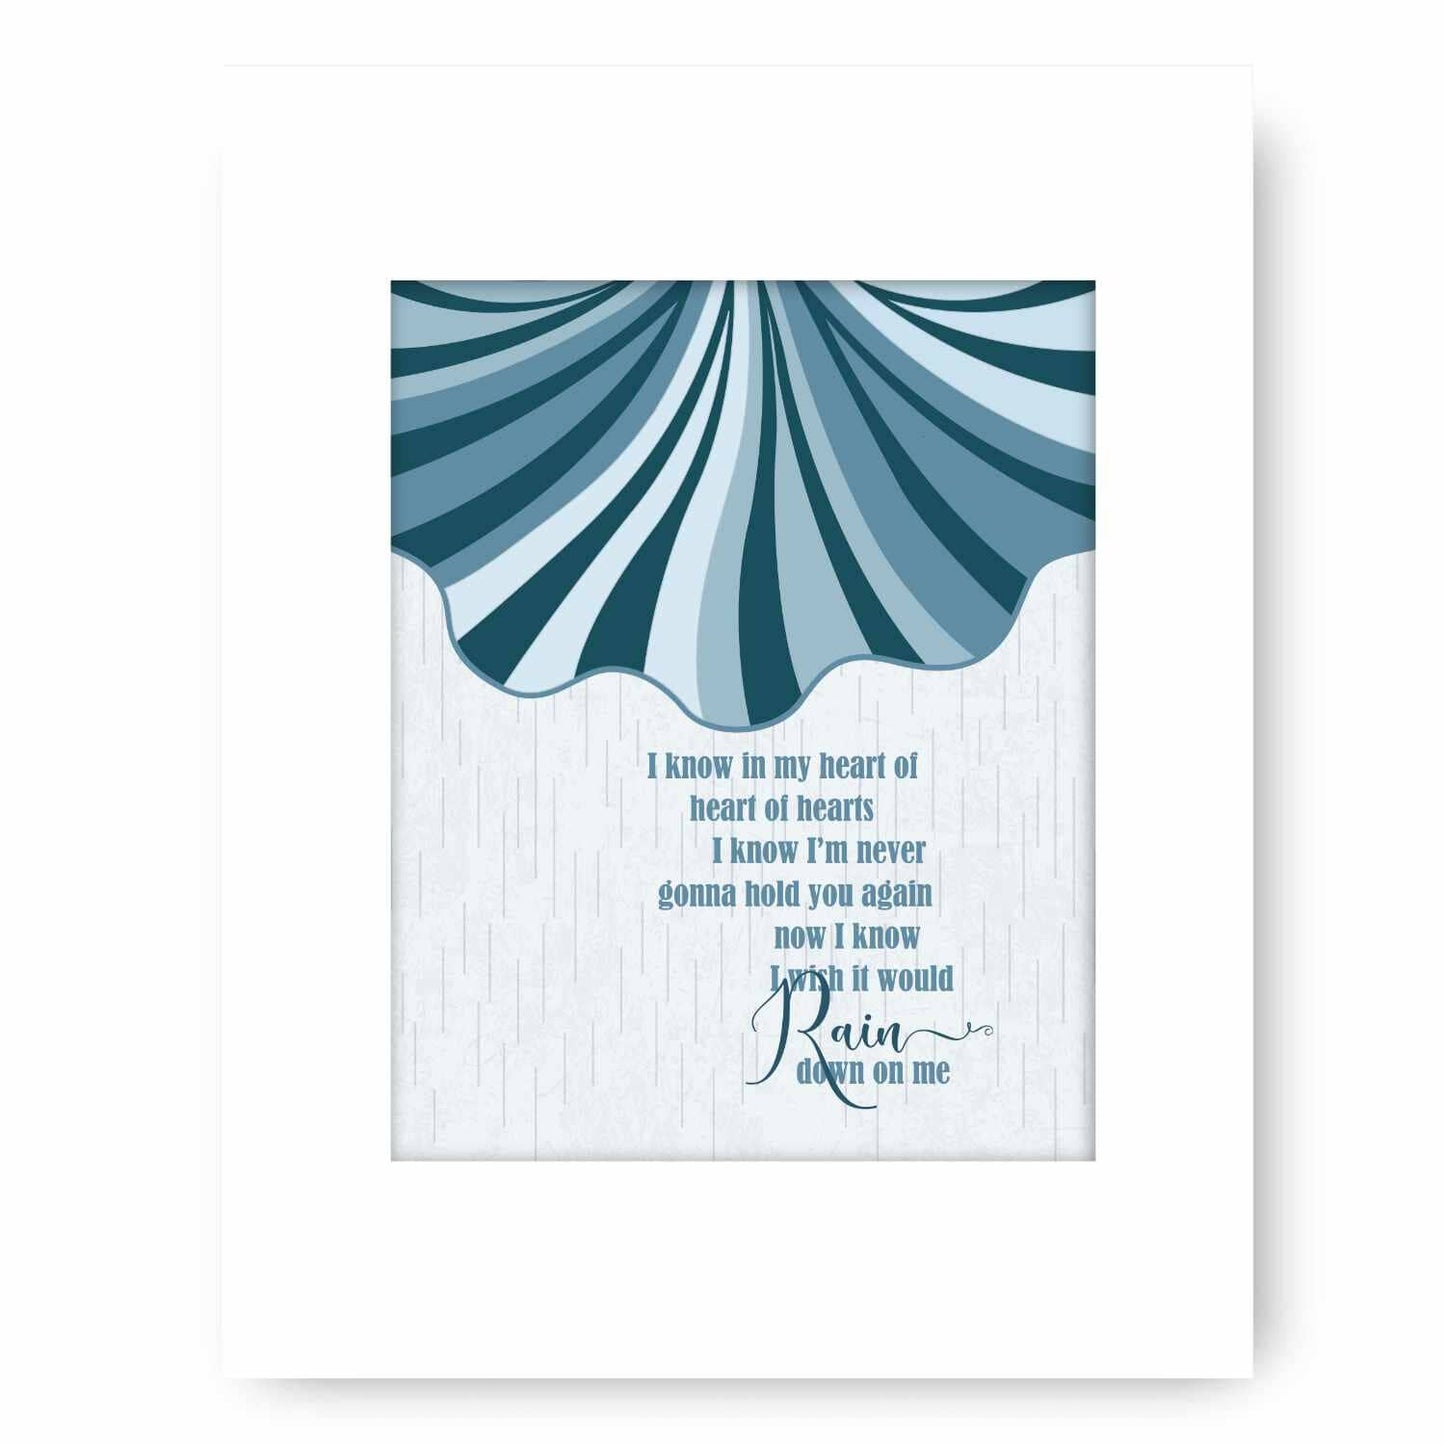 I Wish it Would Rain Down by Phil Collins - Song Lyric Poster Song Lyrics Art Song Lyrics Art 8x10 White Matted Print 